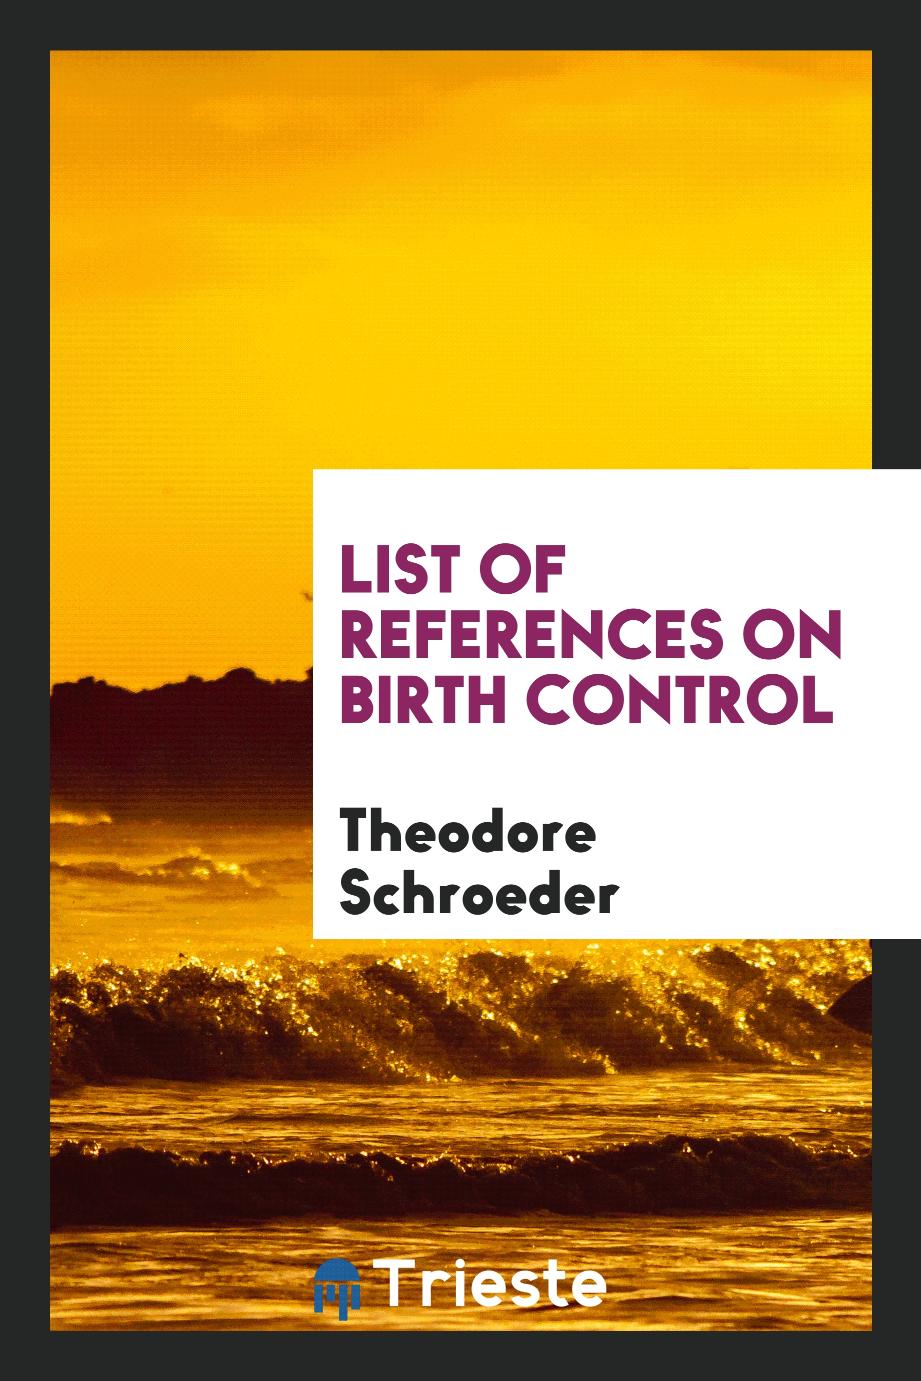 List of References on Birth Control